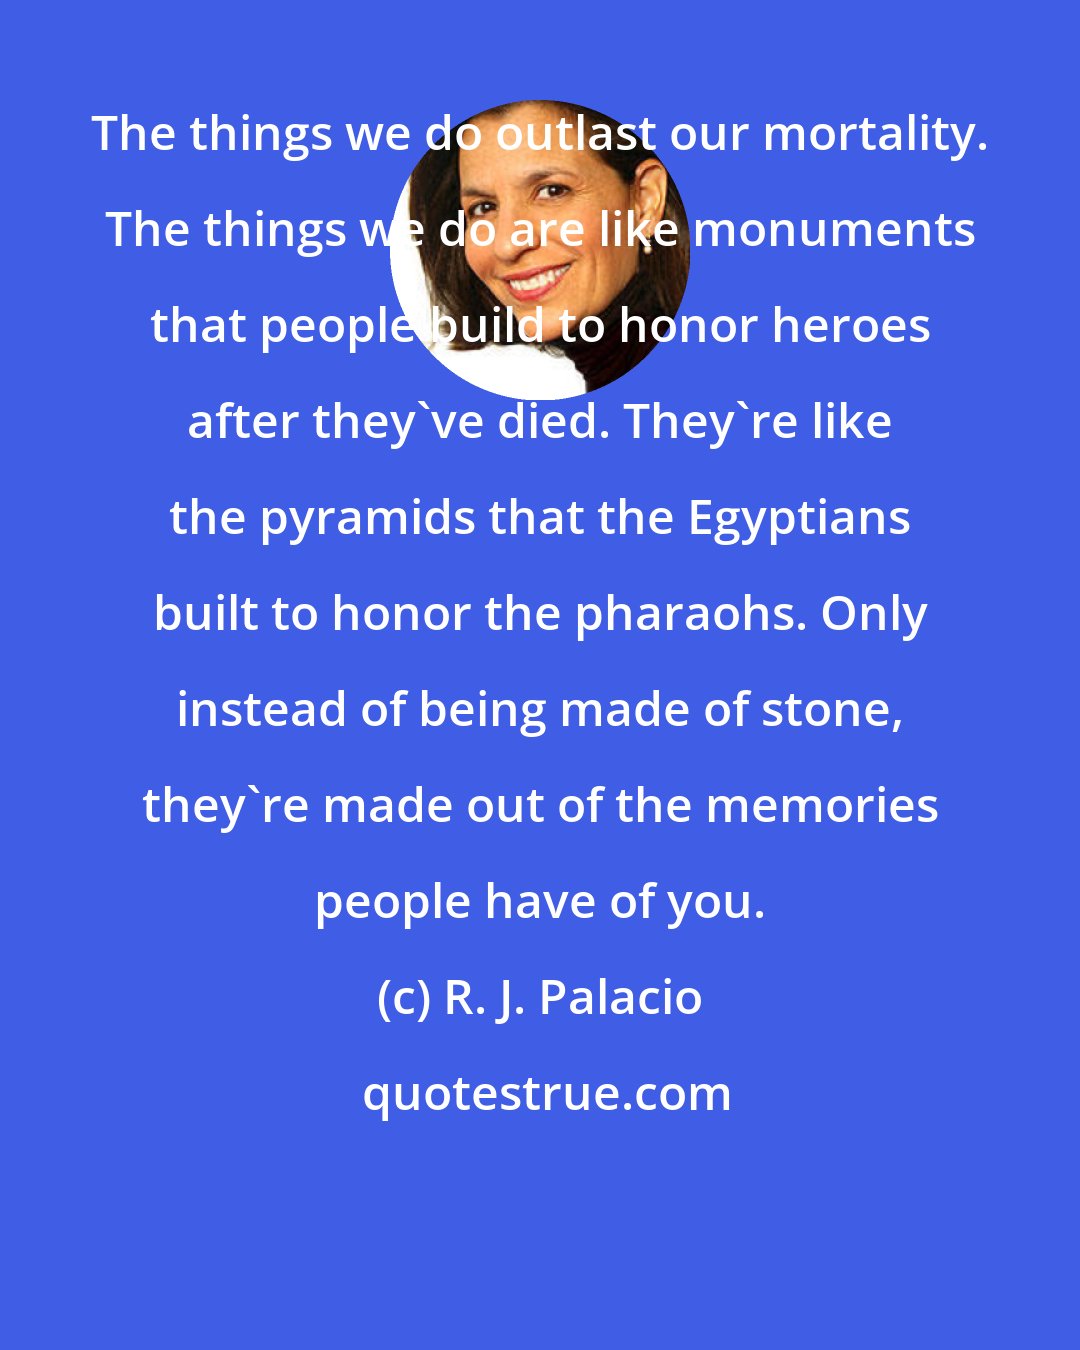 R. J. Palacio: The things we do outlast our mortality. The things we do are like monuments that people build to honor heroes after they've died. They're like the pyramids that the Egyptians built to honor the pharaohs. Only instead of being made of stone, they're made out of the memories people have of you.